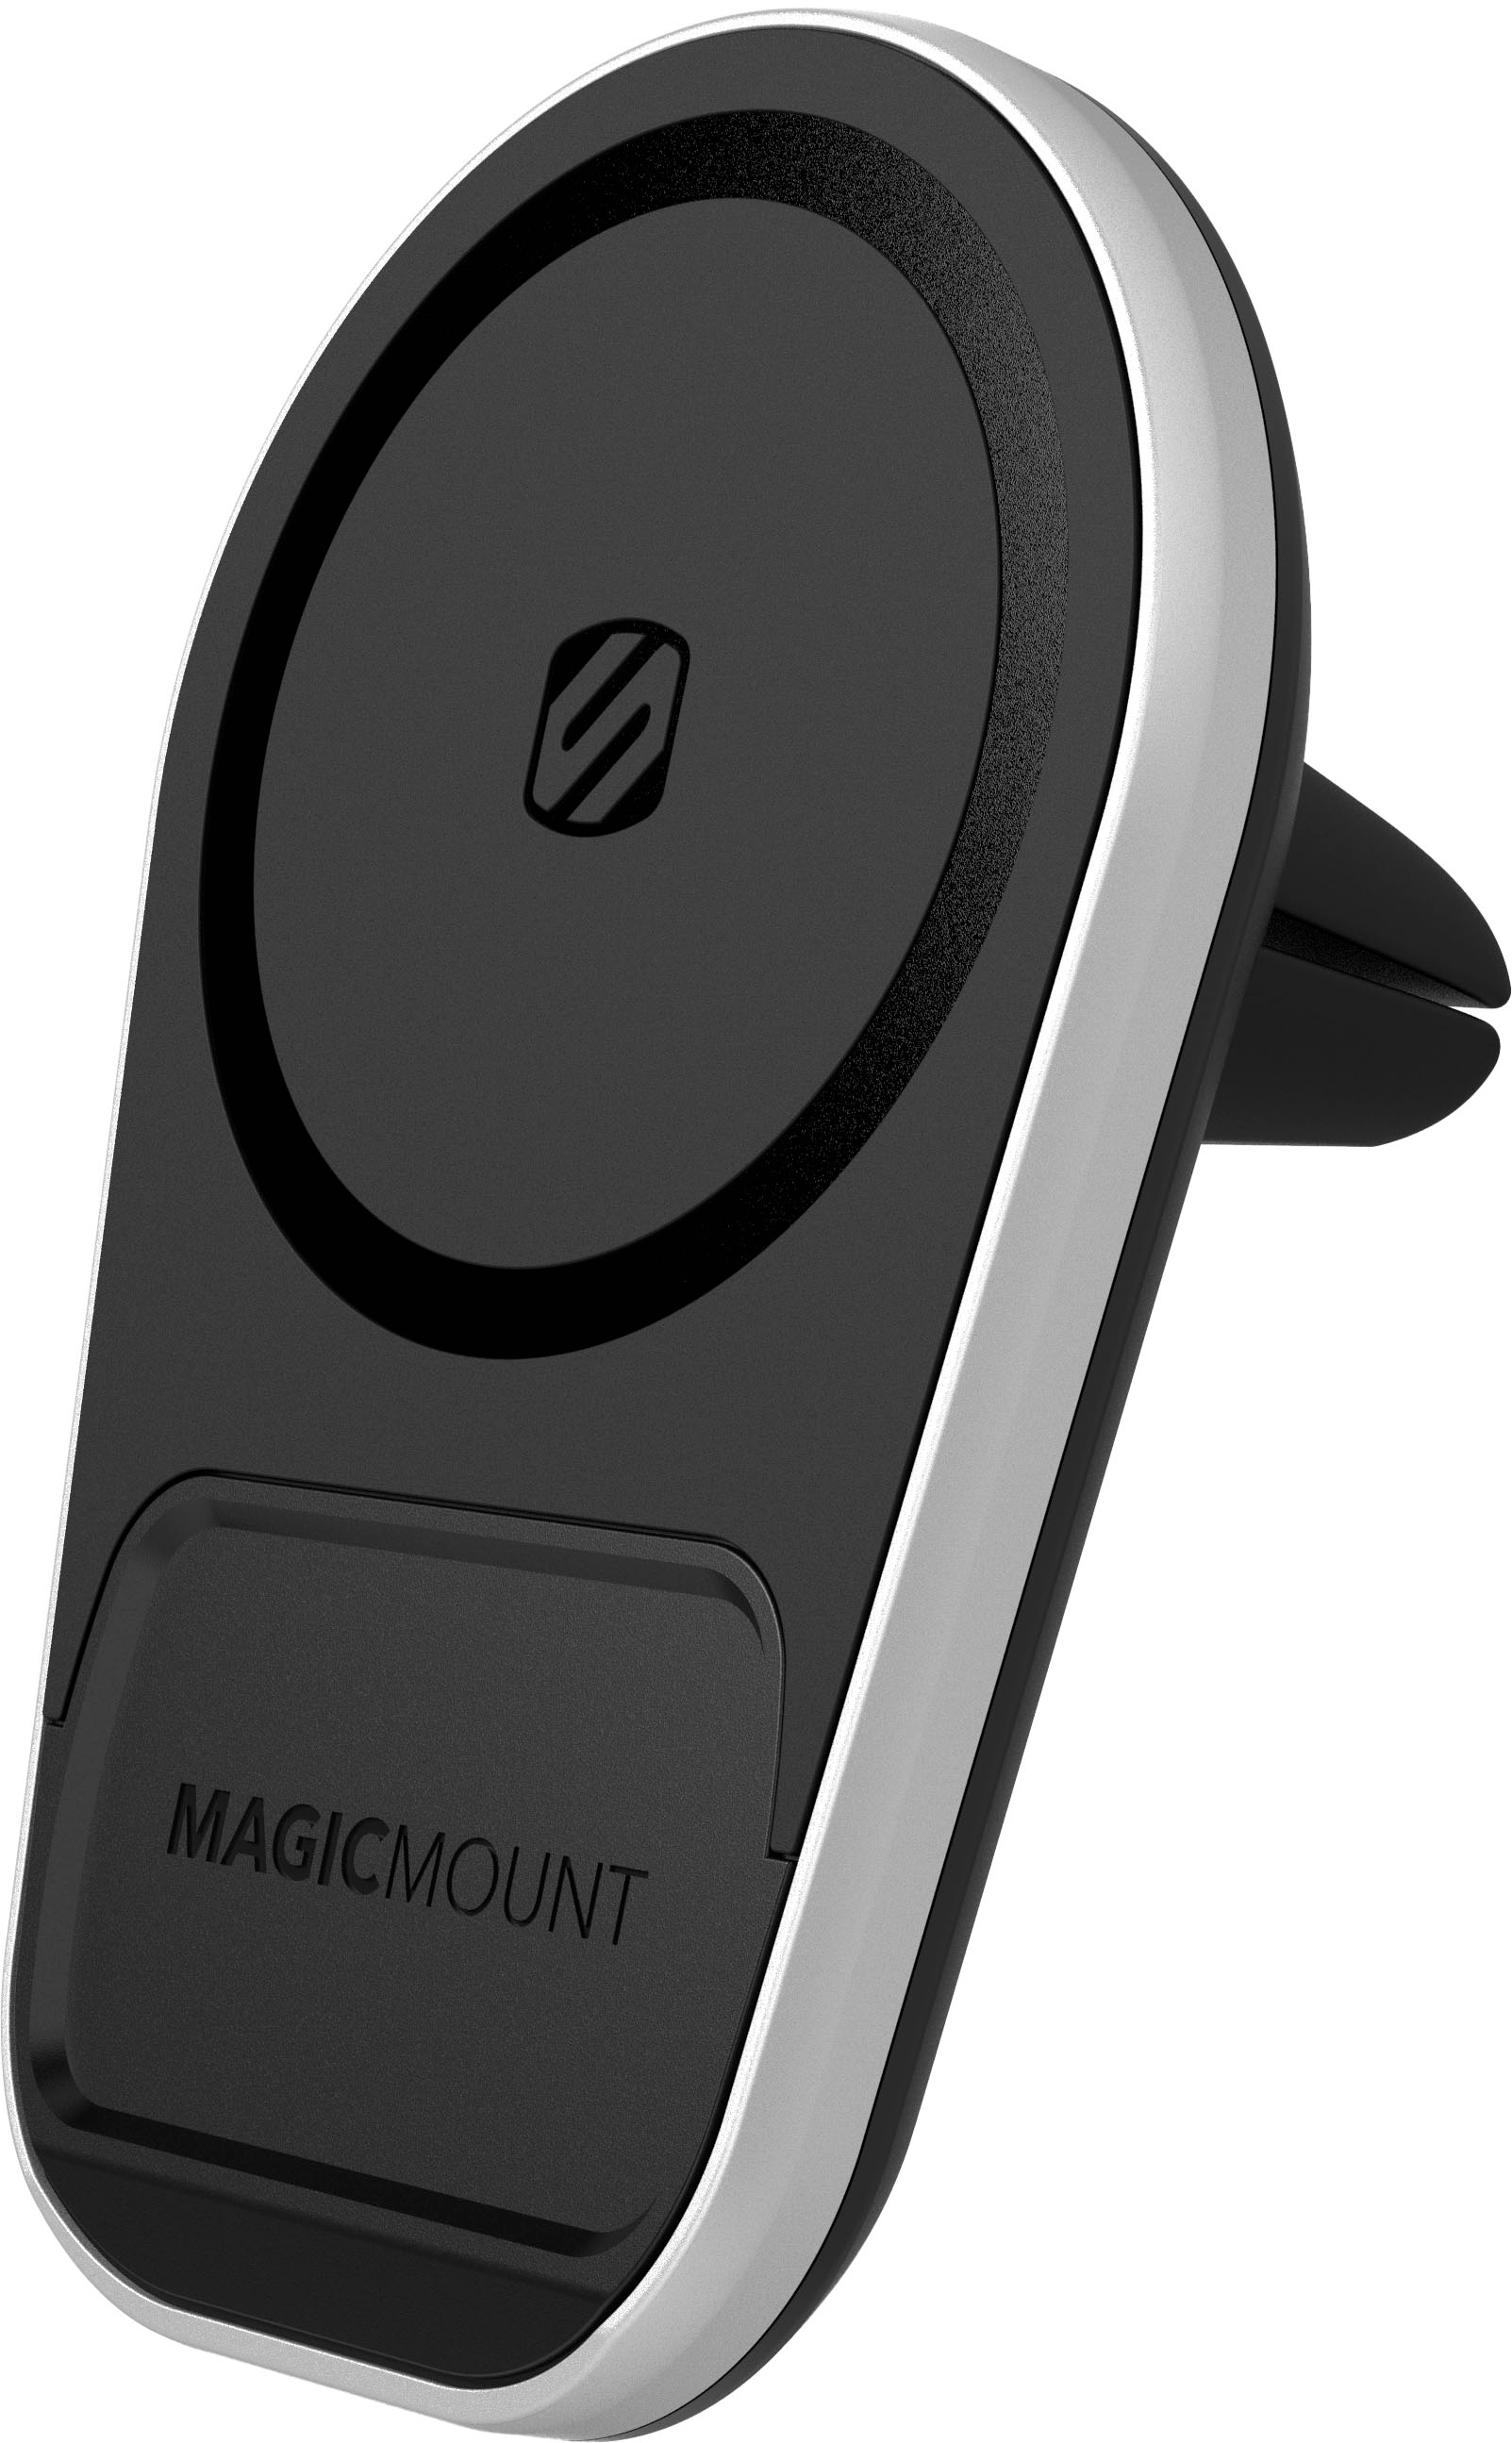 Angle View: Scosche - MagicMount Pro Charge5 Dash / Vent for most Cell Phones - Black